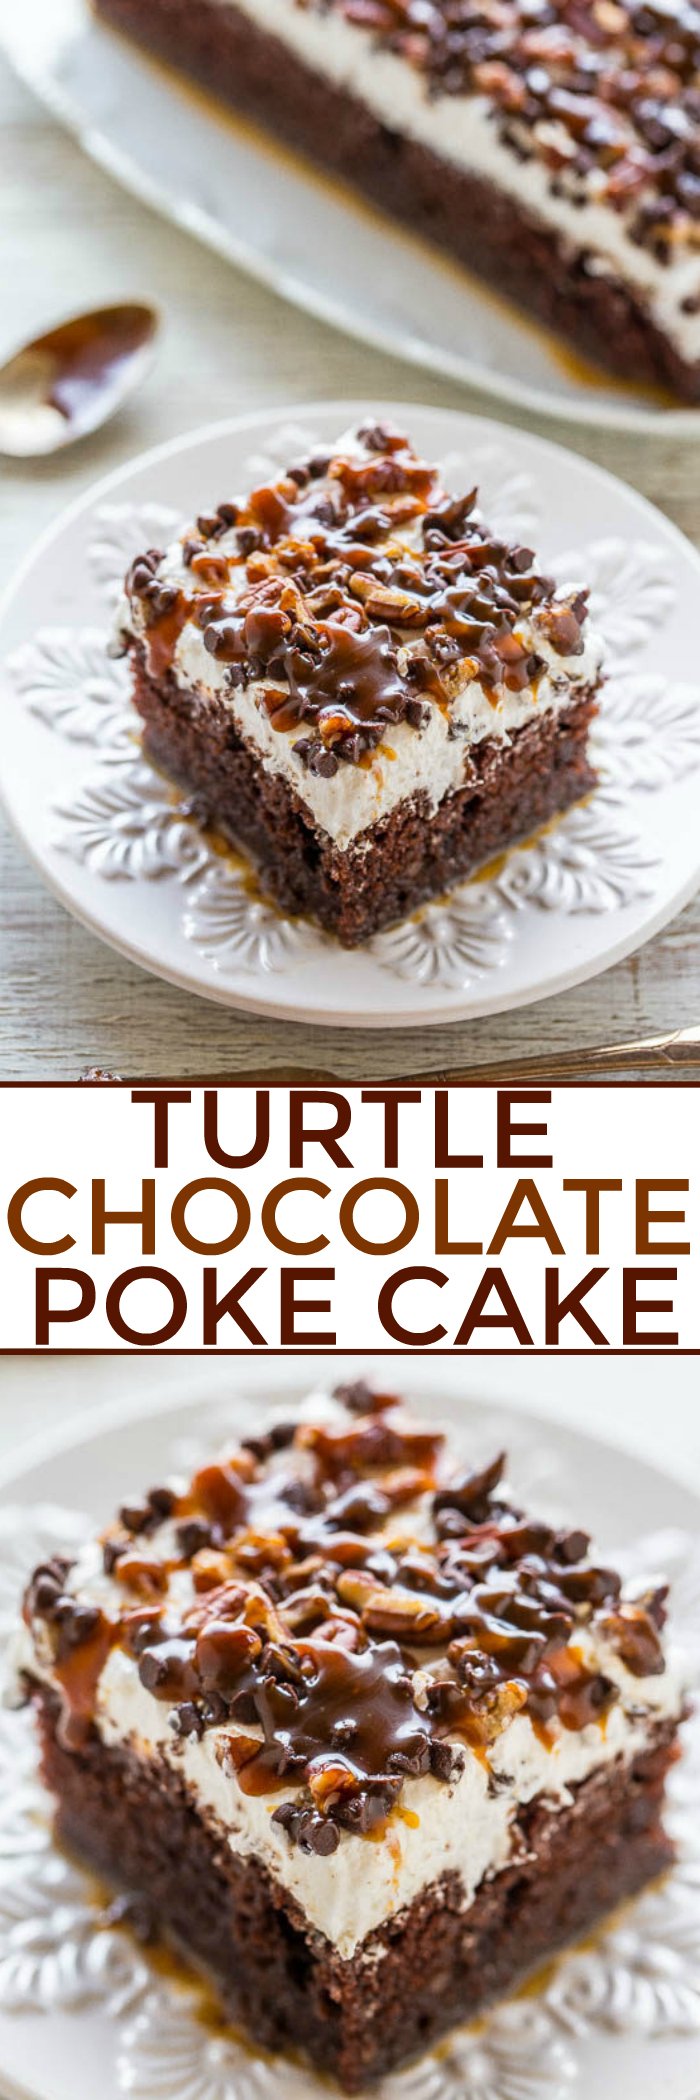 Chocolate Turtle Cake - The flavor of the famous candy in a decadent chocolate cake with tons of CARAMEL and pecans!! Easy, super soft and moist, and a crowd FAVORITE! One of the BEST CAKES ever!!